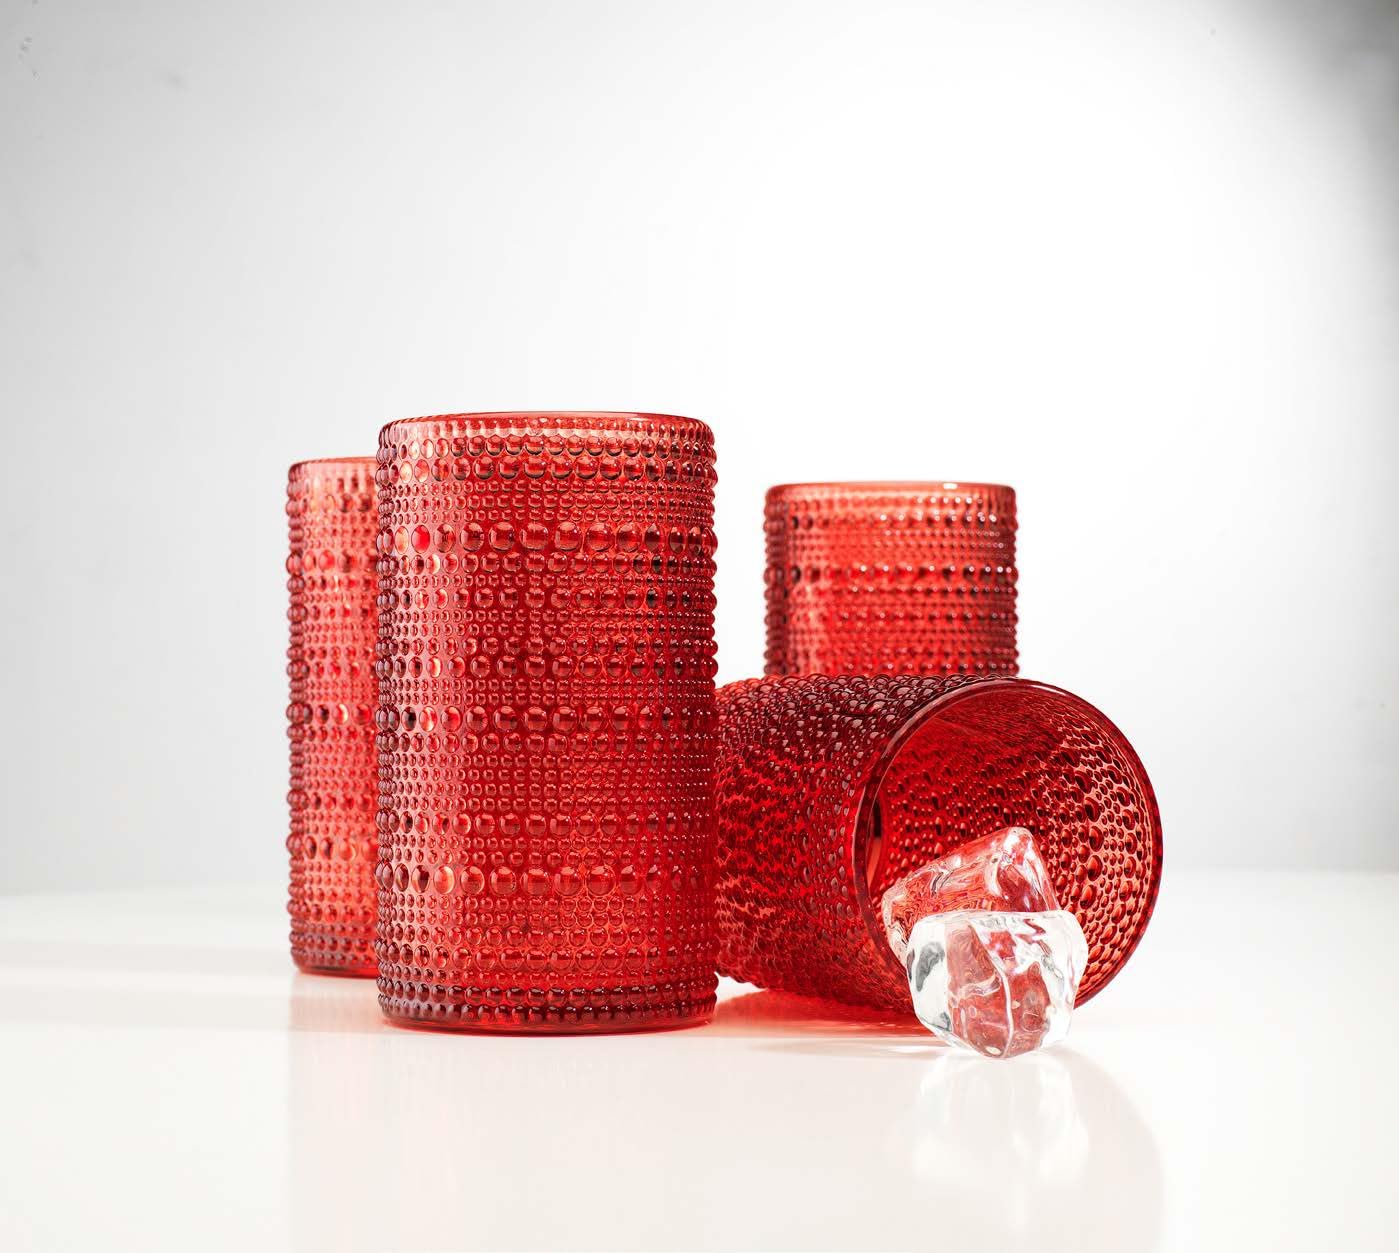 Glaver's Hobnail Drinking Glasses Set of 4 Red Vintage Glassware. 15 Oz. Everyday and Holiday Dinner Beaded Drinking Glasses for Water, Juice, Cocktail.